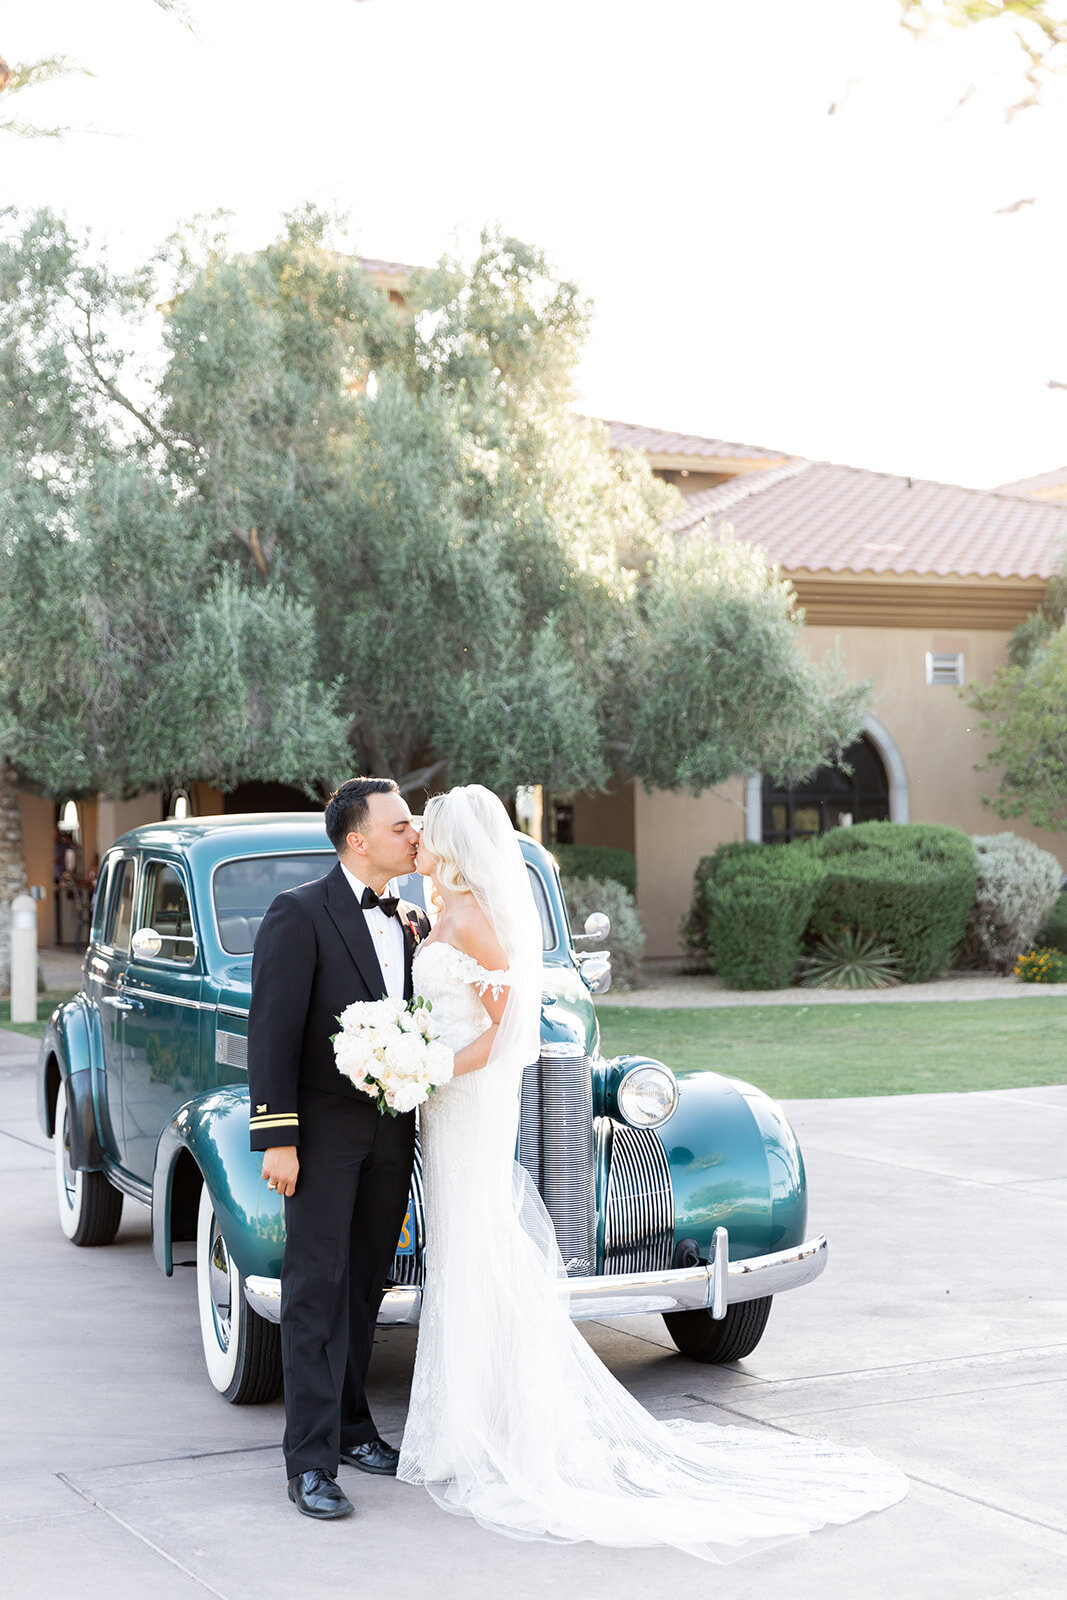 Karlie Colleen Photography - Holly & Ronnie Wedding - Seville Country Club - Gilbert Arizona-681